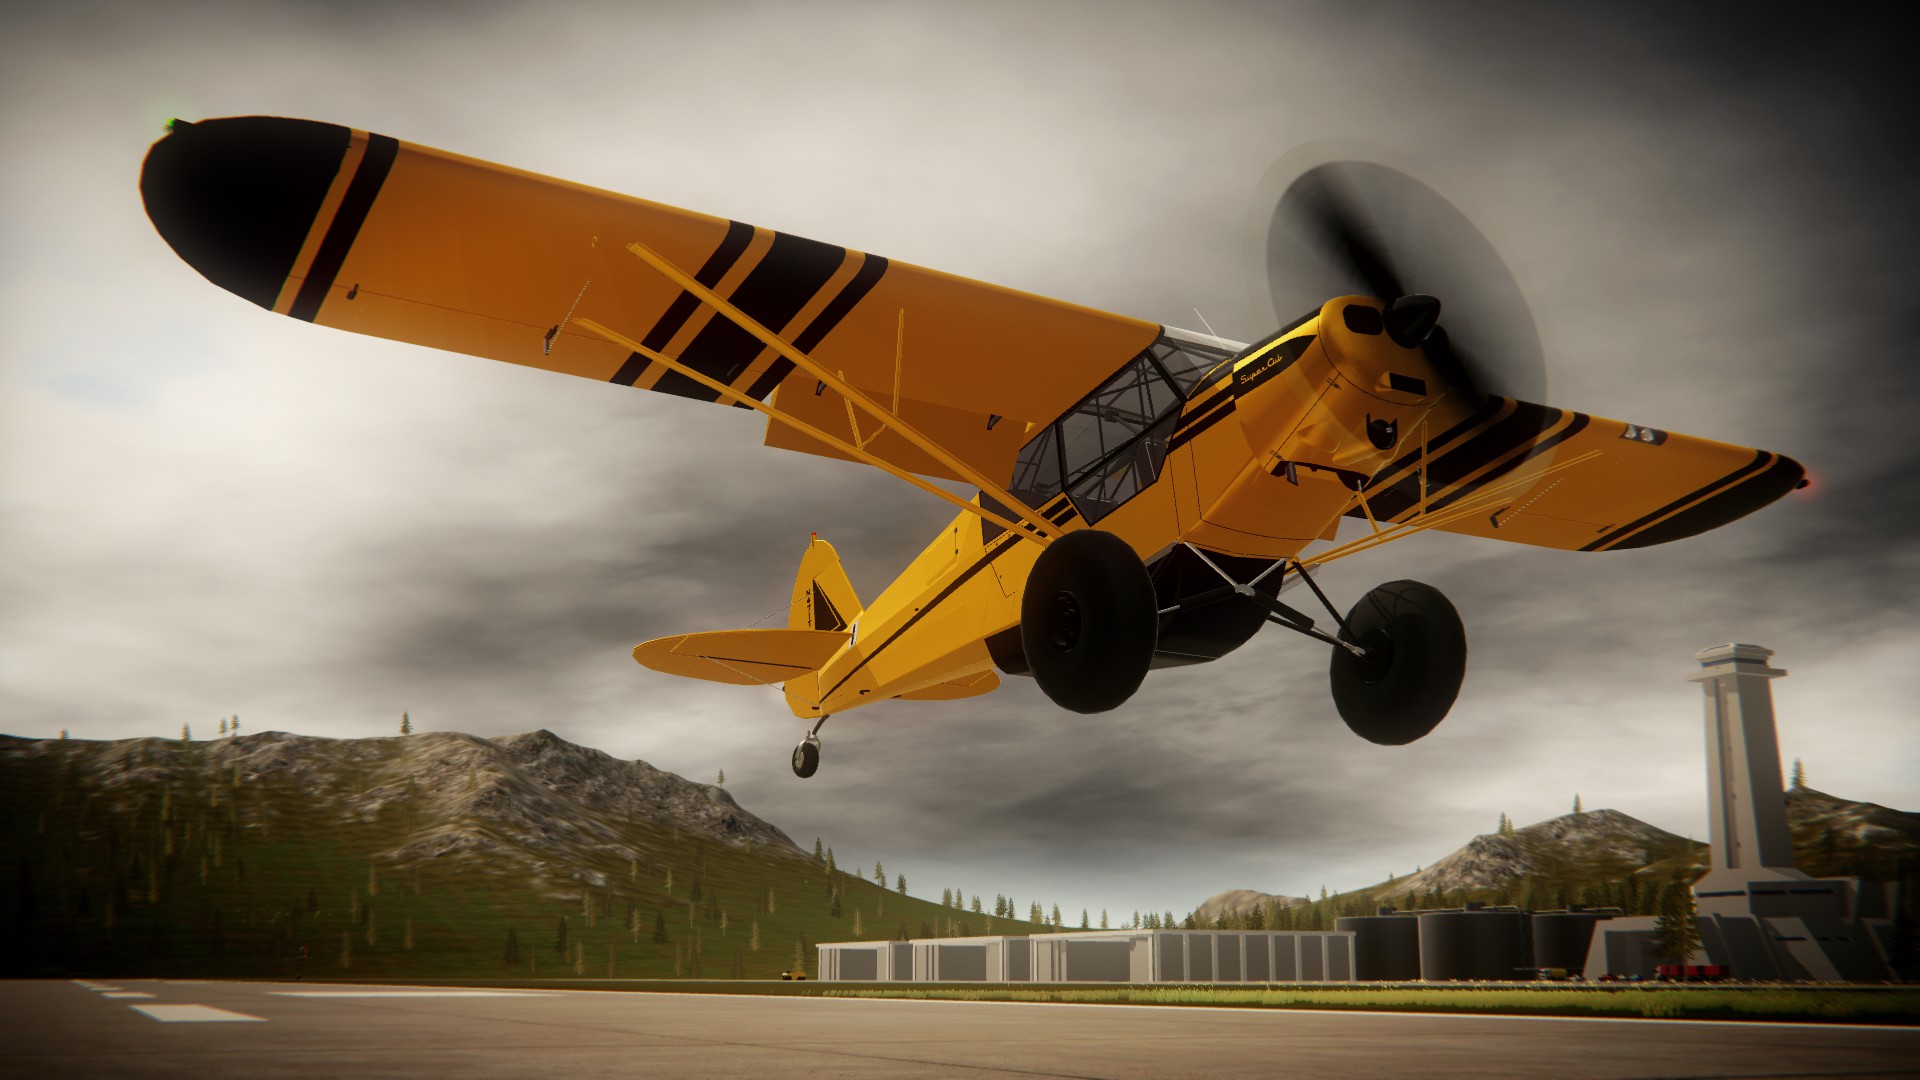 SimplePlanes. The Iconic Bush Plane, The Piper PA 18 Super Cub!. Also I Swear I've Only Made One Of These Before, A Long Time Ago, And It Was A